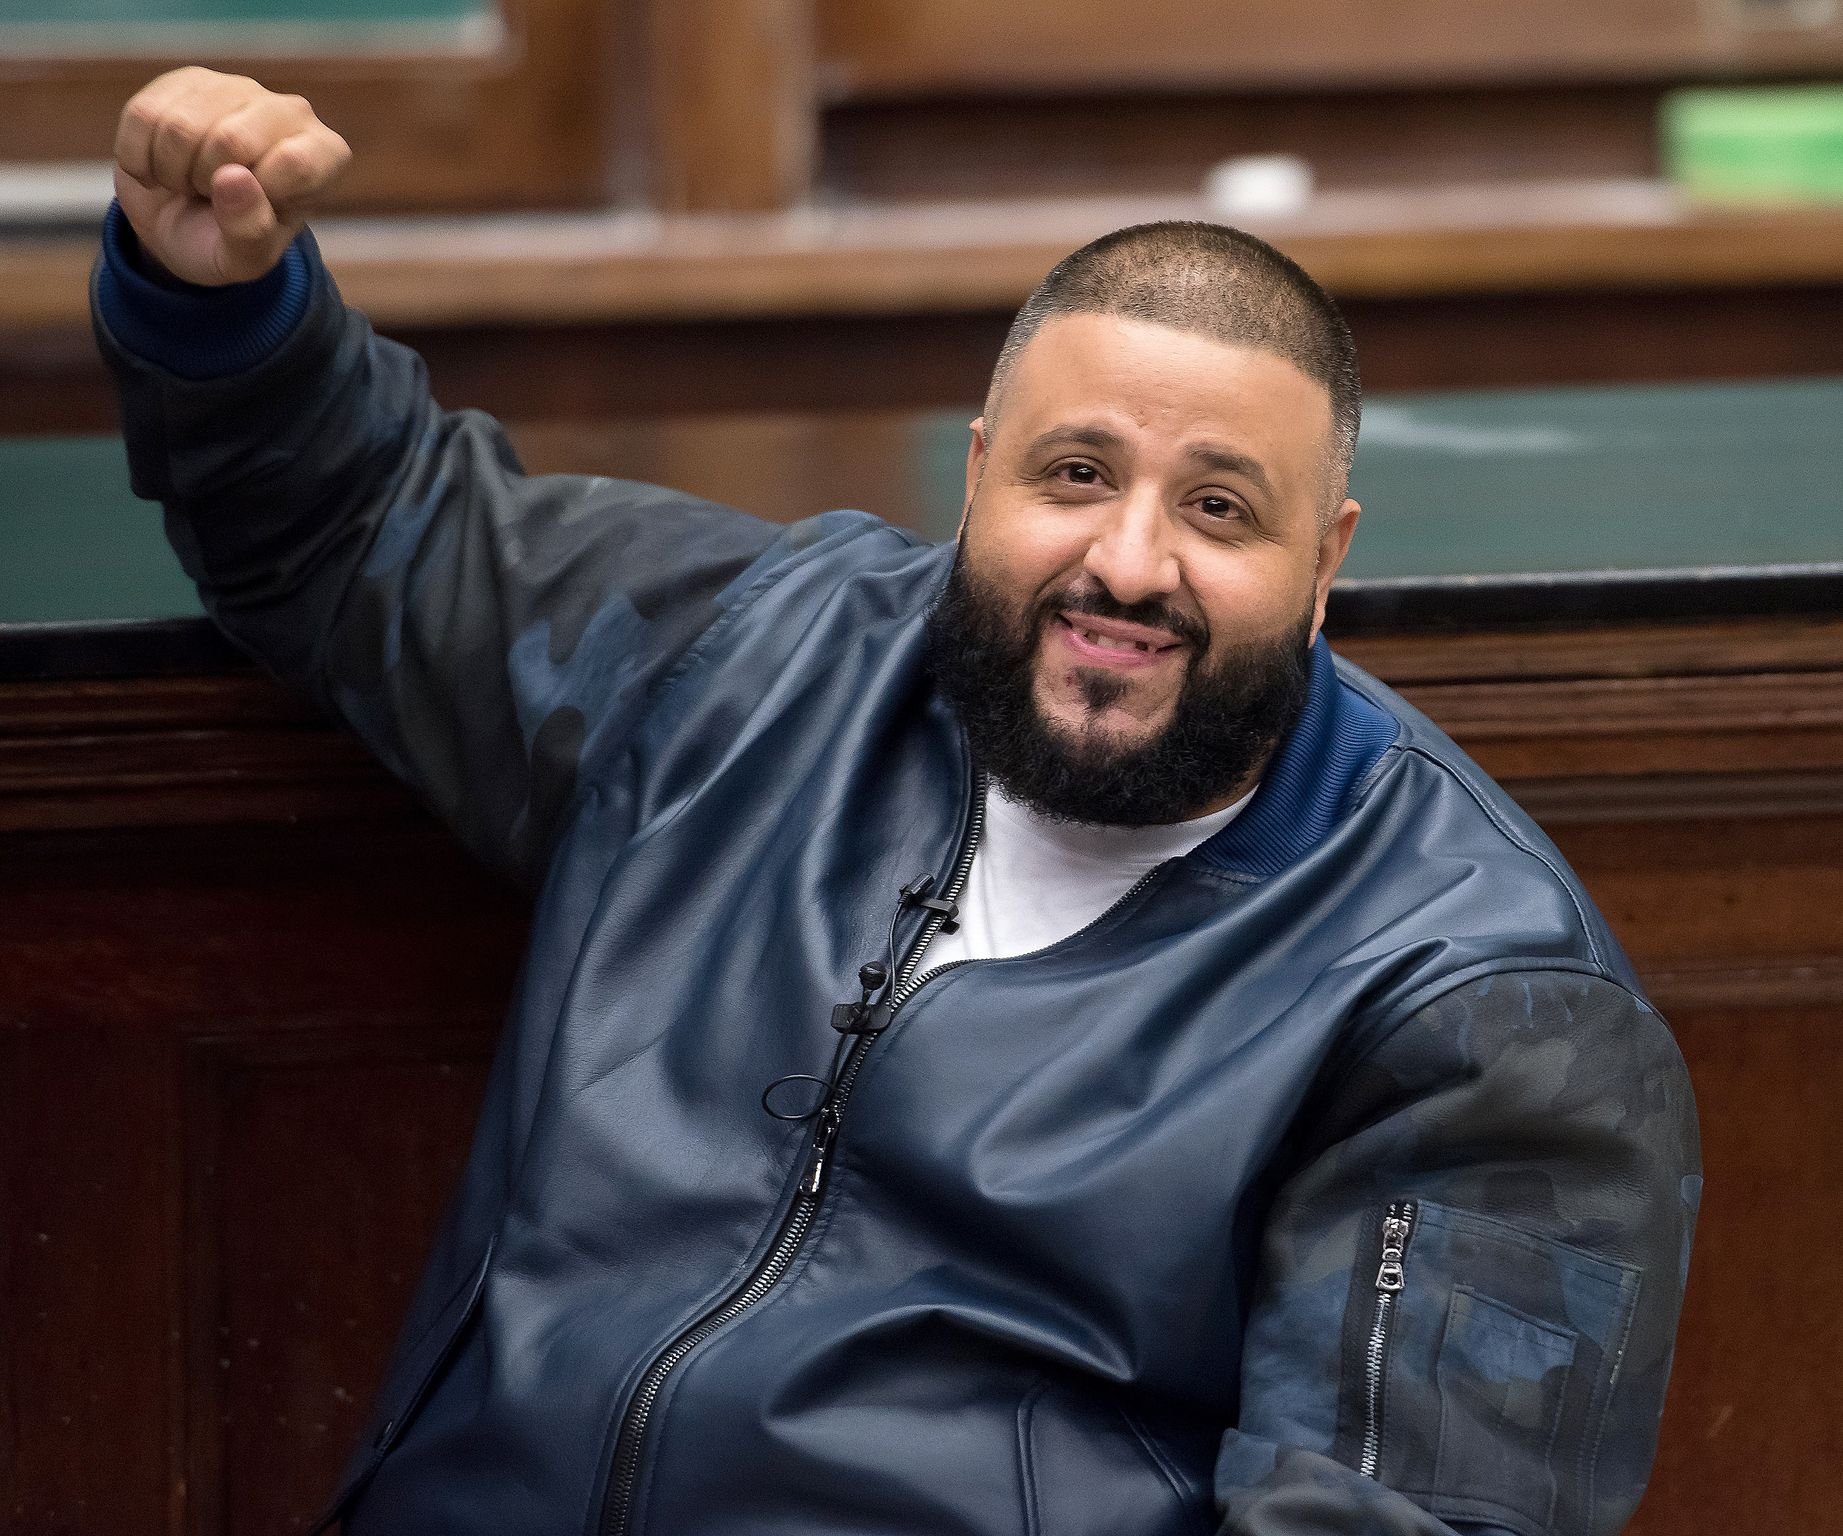 DJ Khaled at "DJ Khaled Presents: Keys To Success A Conversation With Arianna Huffington" on December 8, 2016 in New York City. | Photo: Getty Images